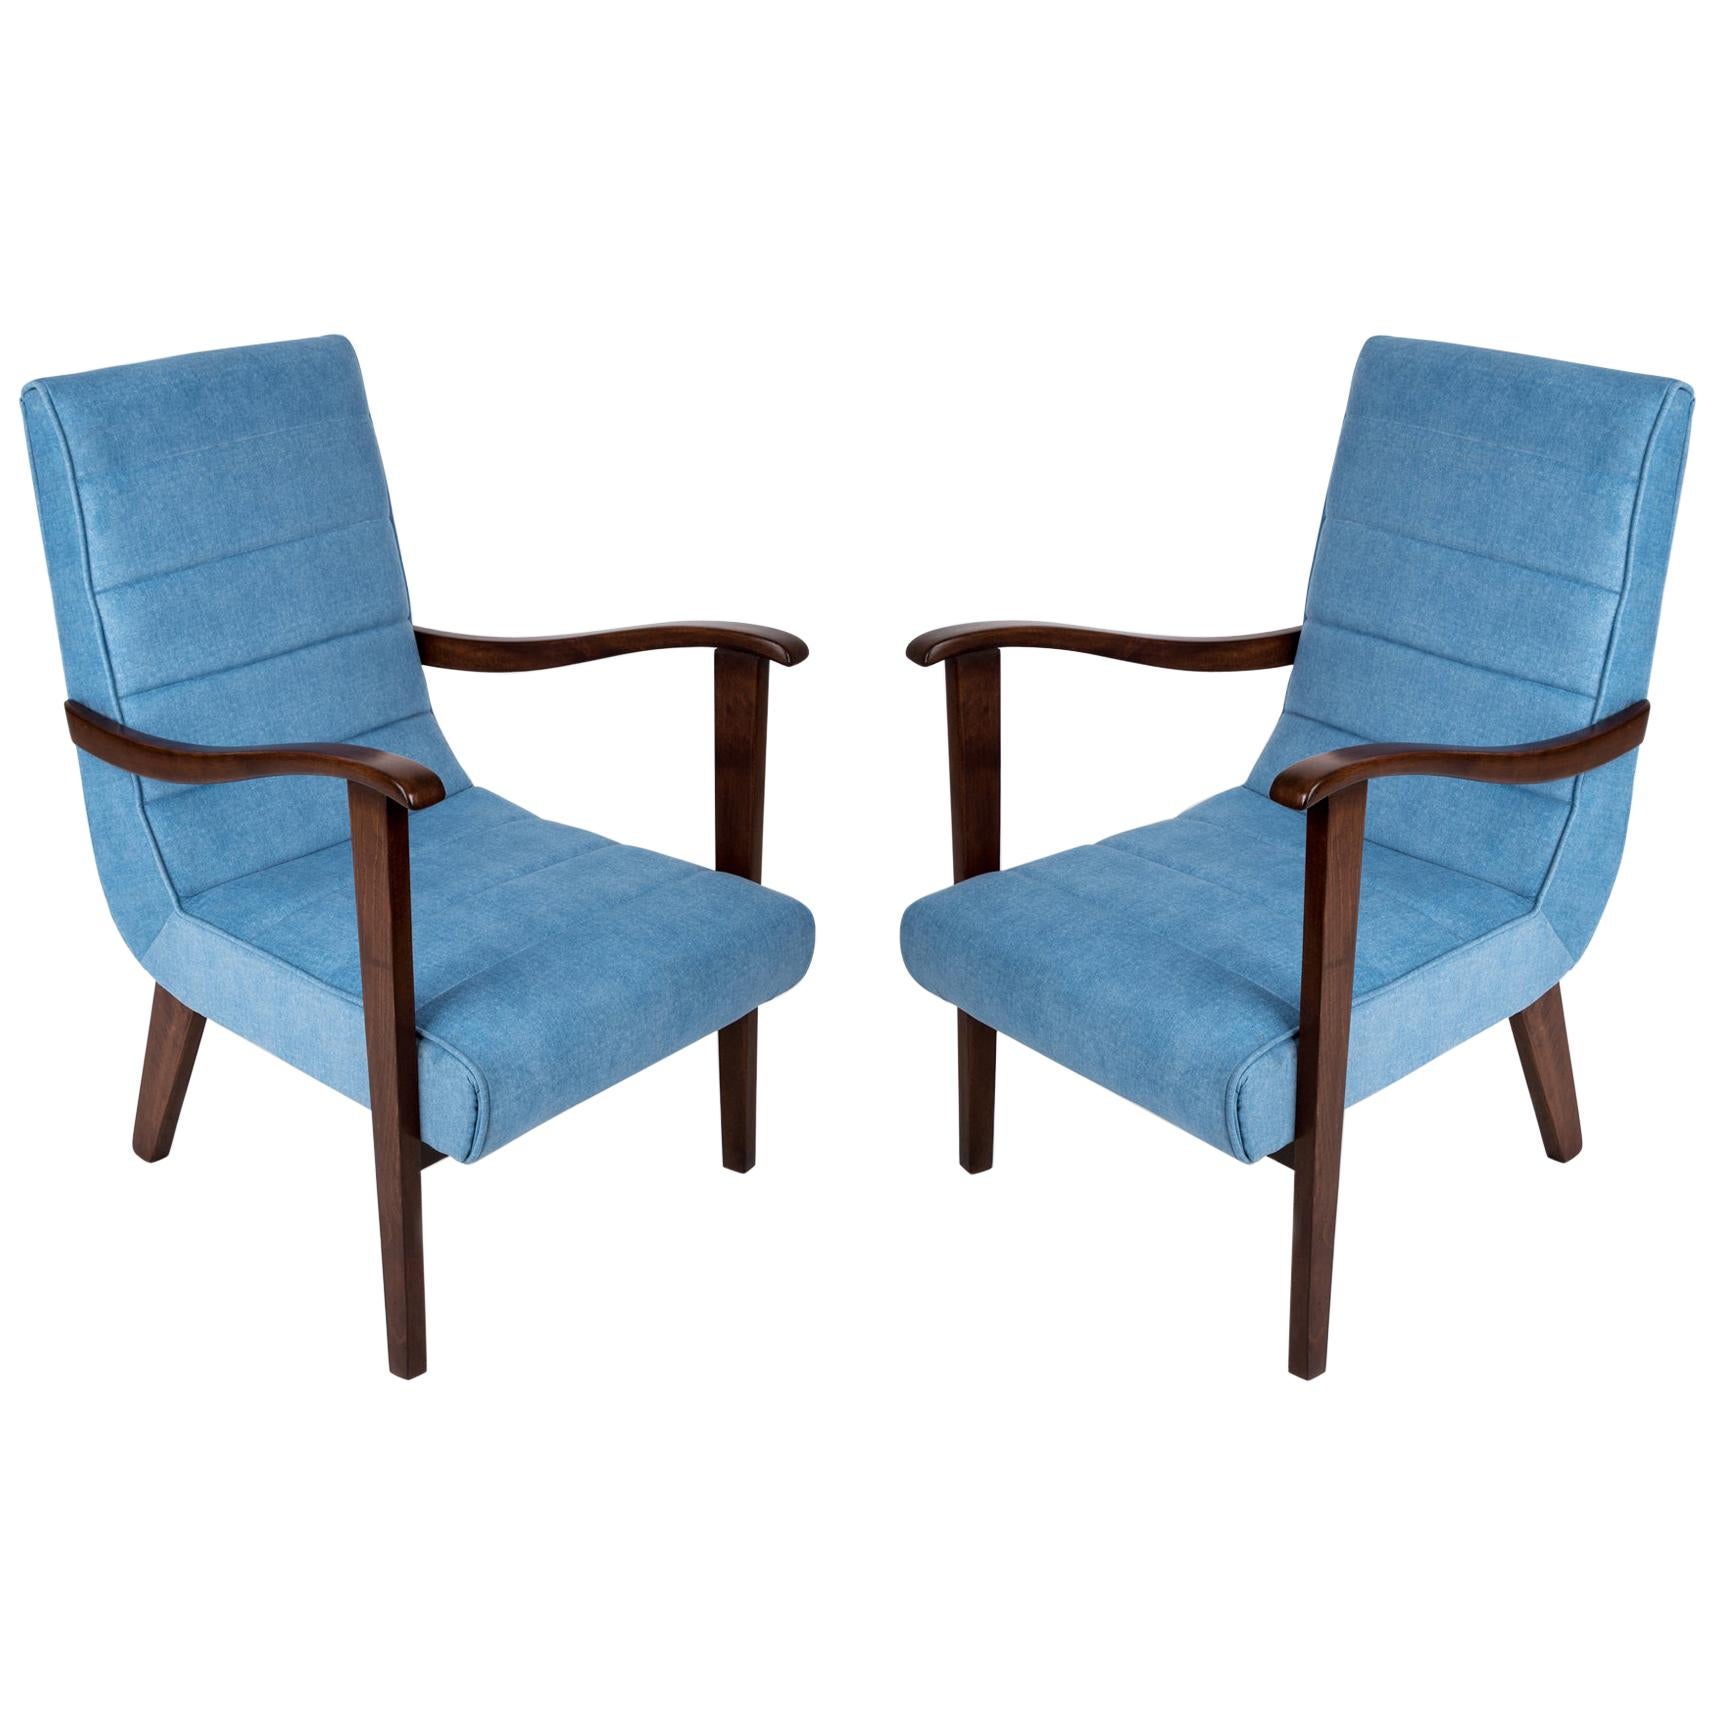 Set of Two Mid-Century Modern Blue Armchairs by Prudnik Factory, 1960s, Poland For Sale